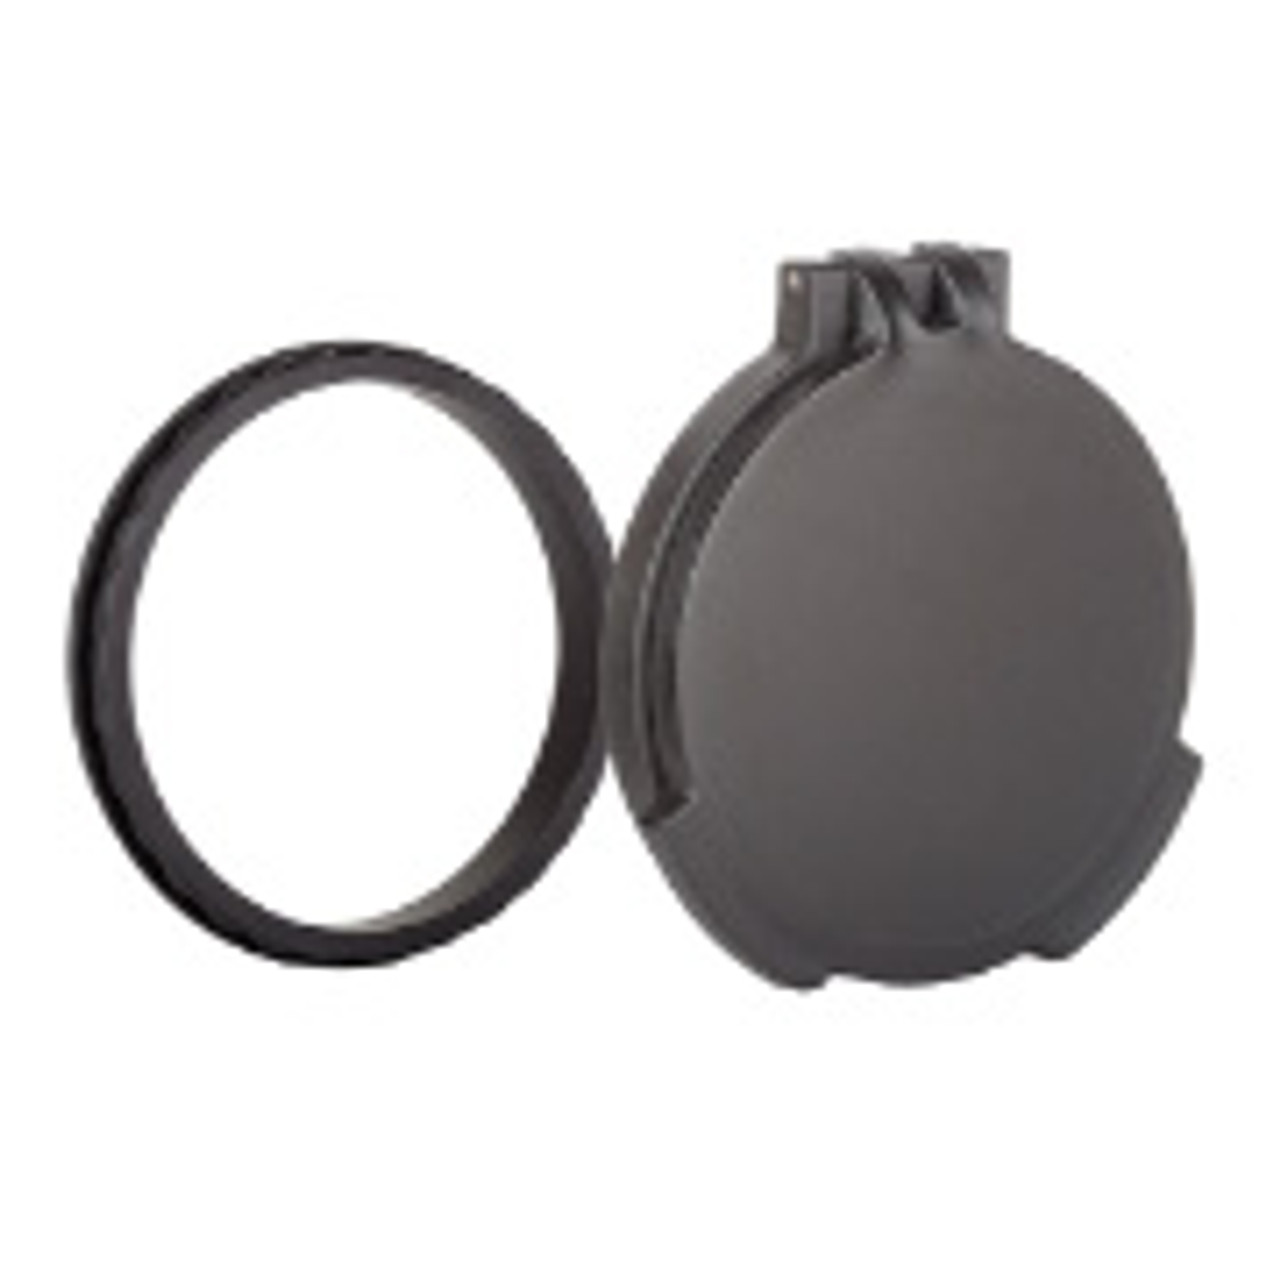 Scope Cover with Adapter Ring for Steiner P4Xi 4-16x56 | Black 